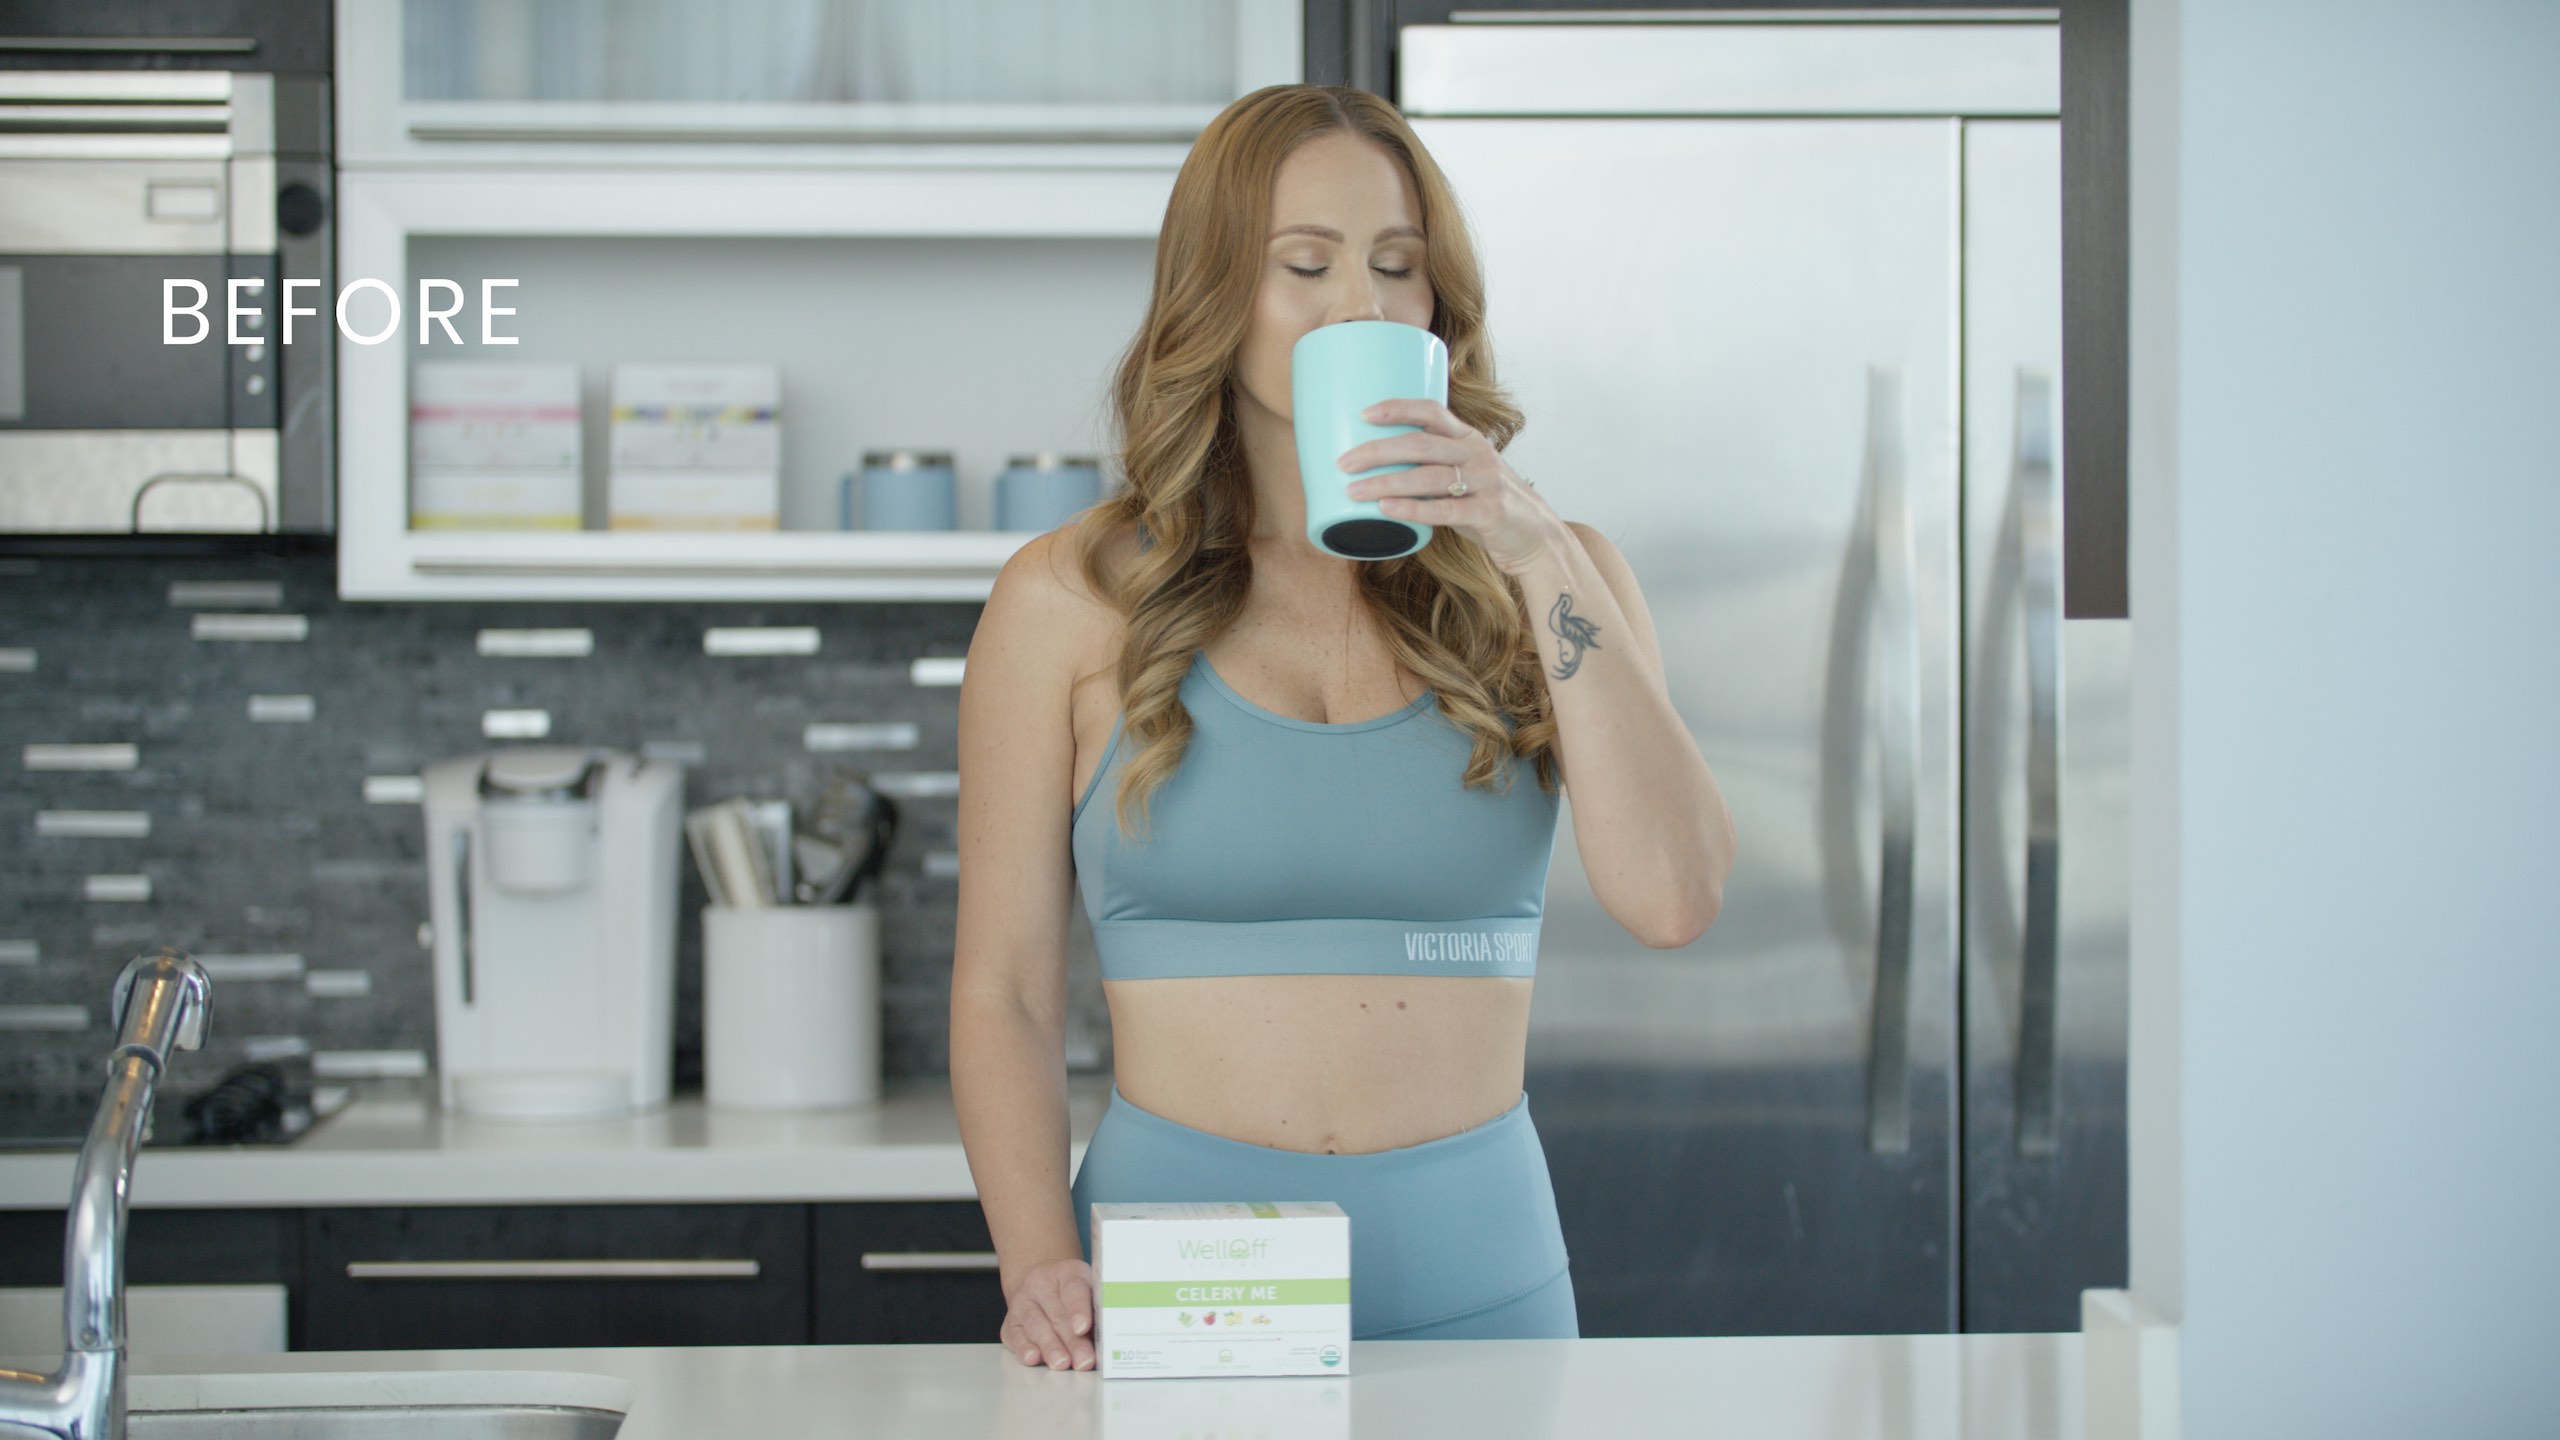 VFX Breakdown Animations with white title Before over image of woman wearing teal sports top and pants enjoying a light blue cup of coffee with her eyes closed in a kitchen with a box of Celery Me